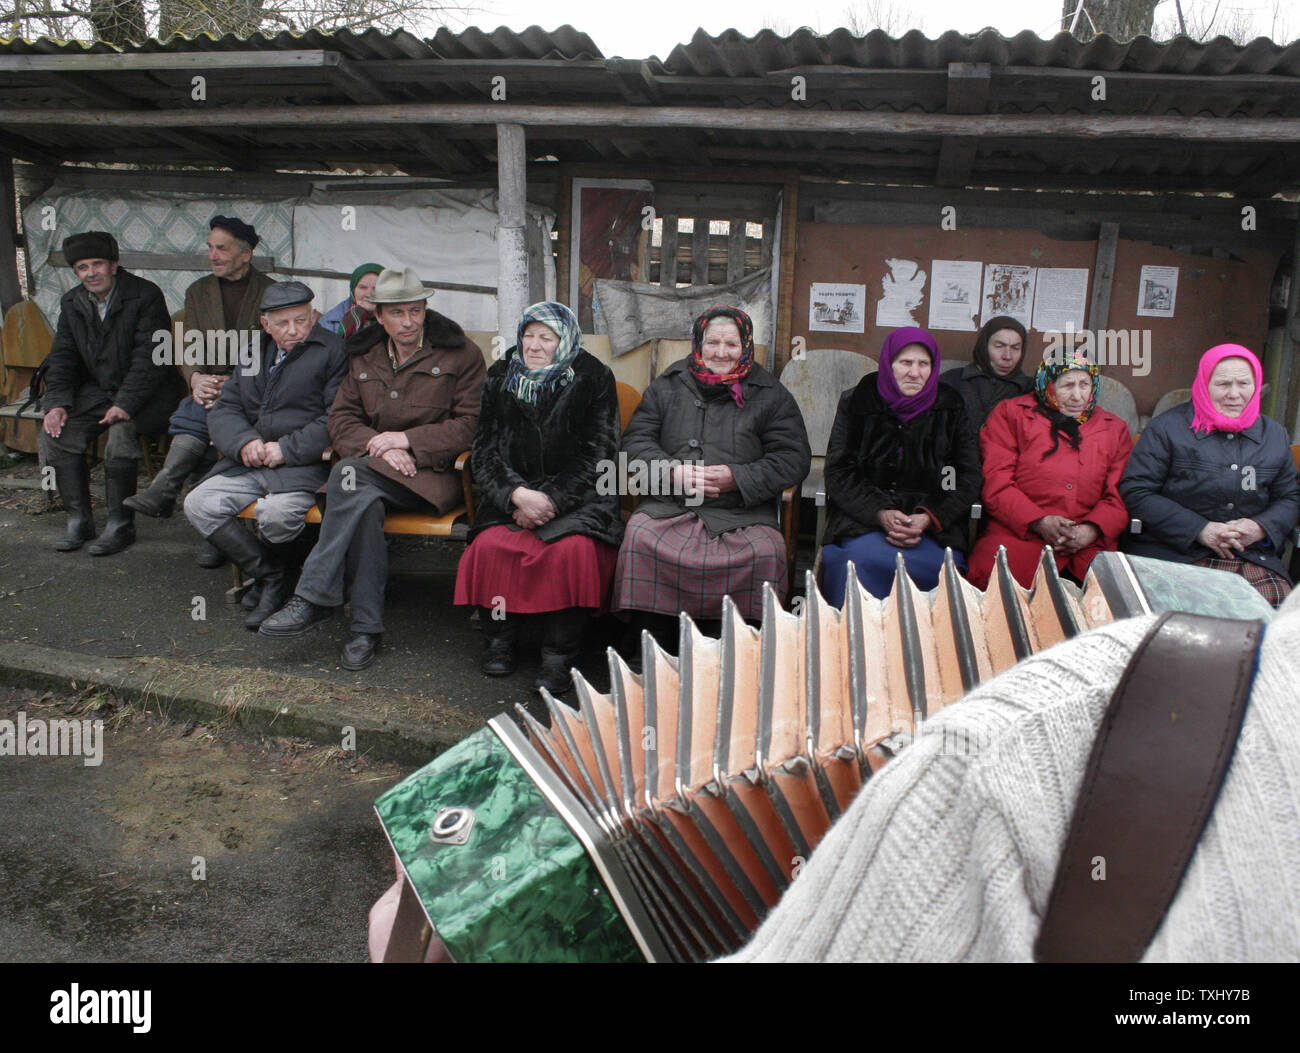 Elderly Ukrainian illegal settlers in the exclusion zone around the closed Chernobyl nuclear power plant attend an open air concert in the Ilinci village, April 5, 2006. At the end of April, Ukraine will mark the 20th anniversary of the Chernobyl nuclear disaster, when the fourth reactor at the Chernobyl plant exploded, spreading a radioactive cloud across the former Soviet Union. Thousands of people died from the effects of the radiation and millions more in the region and across Europe have suffered health problems. (UPI Photo/Sergey Starostenko) Stock Photo